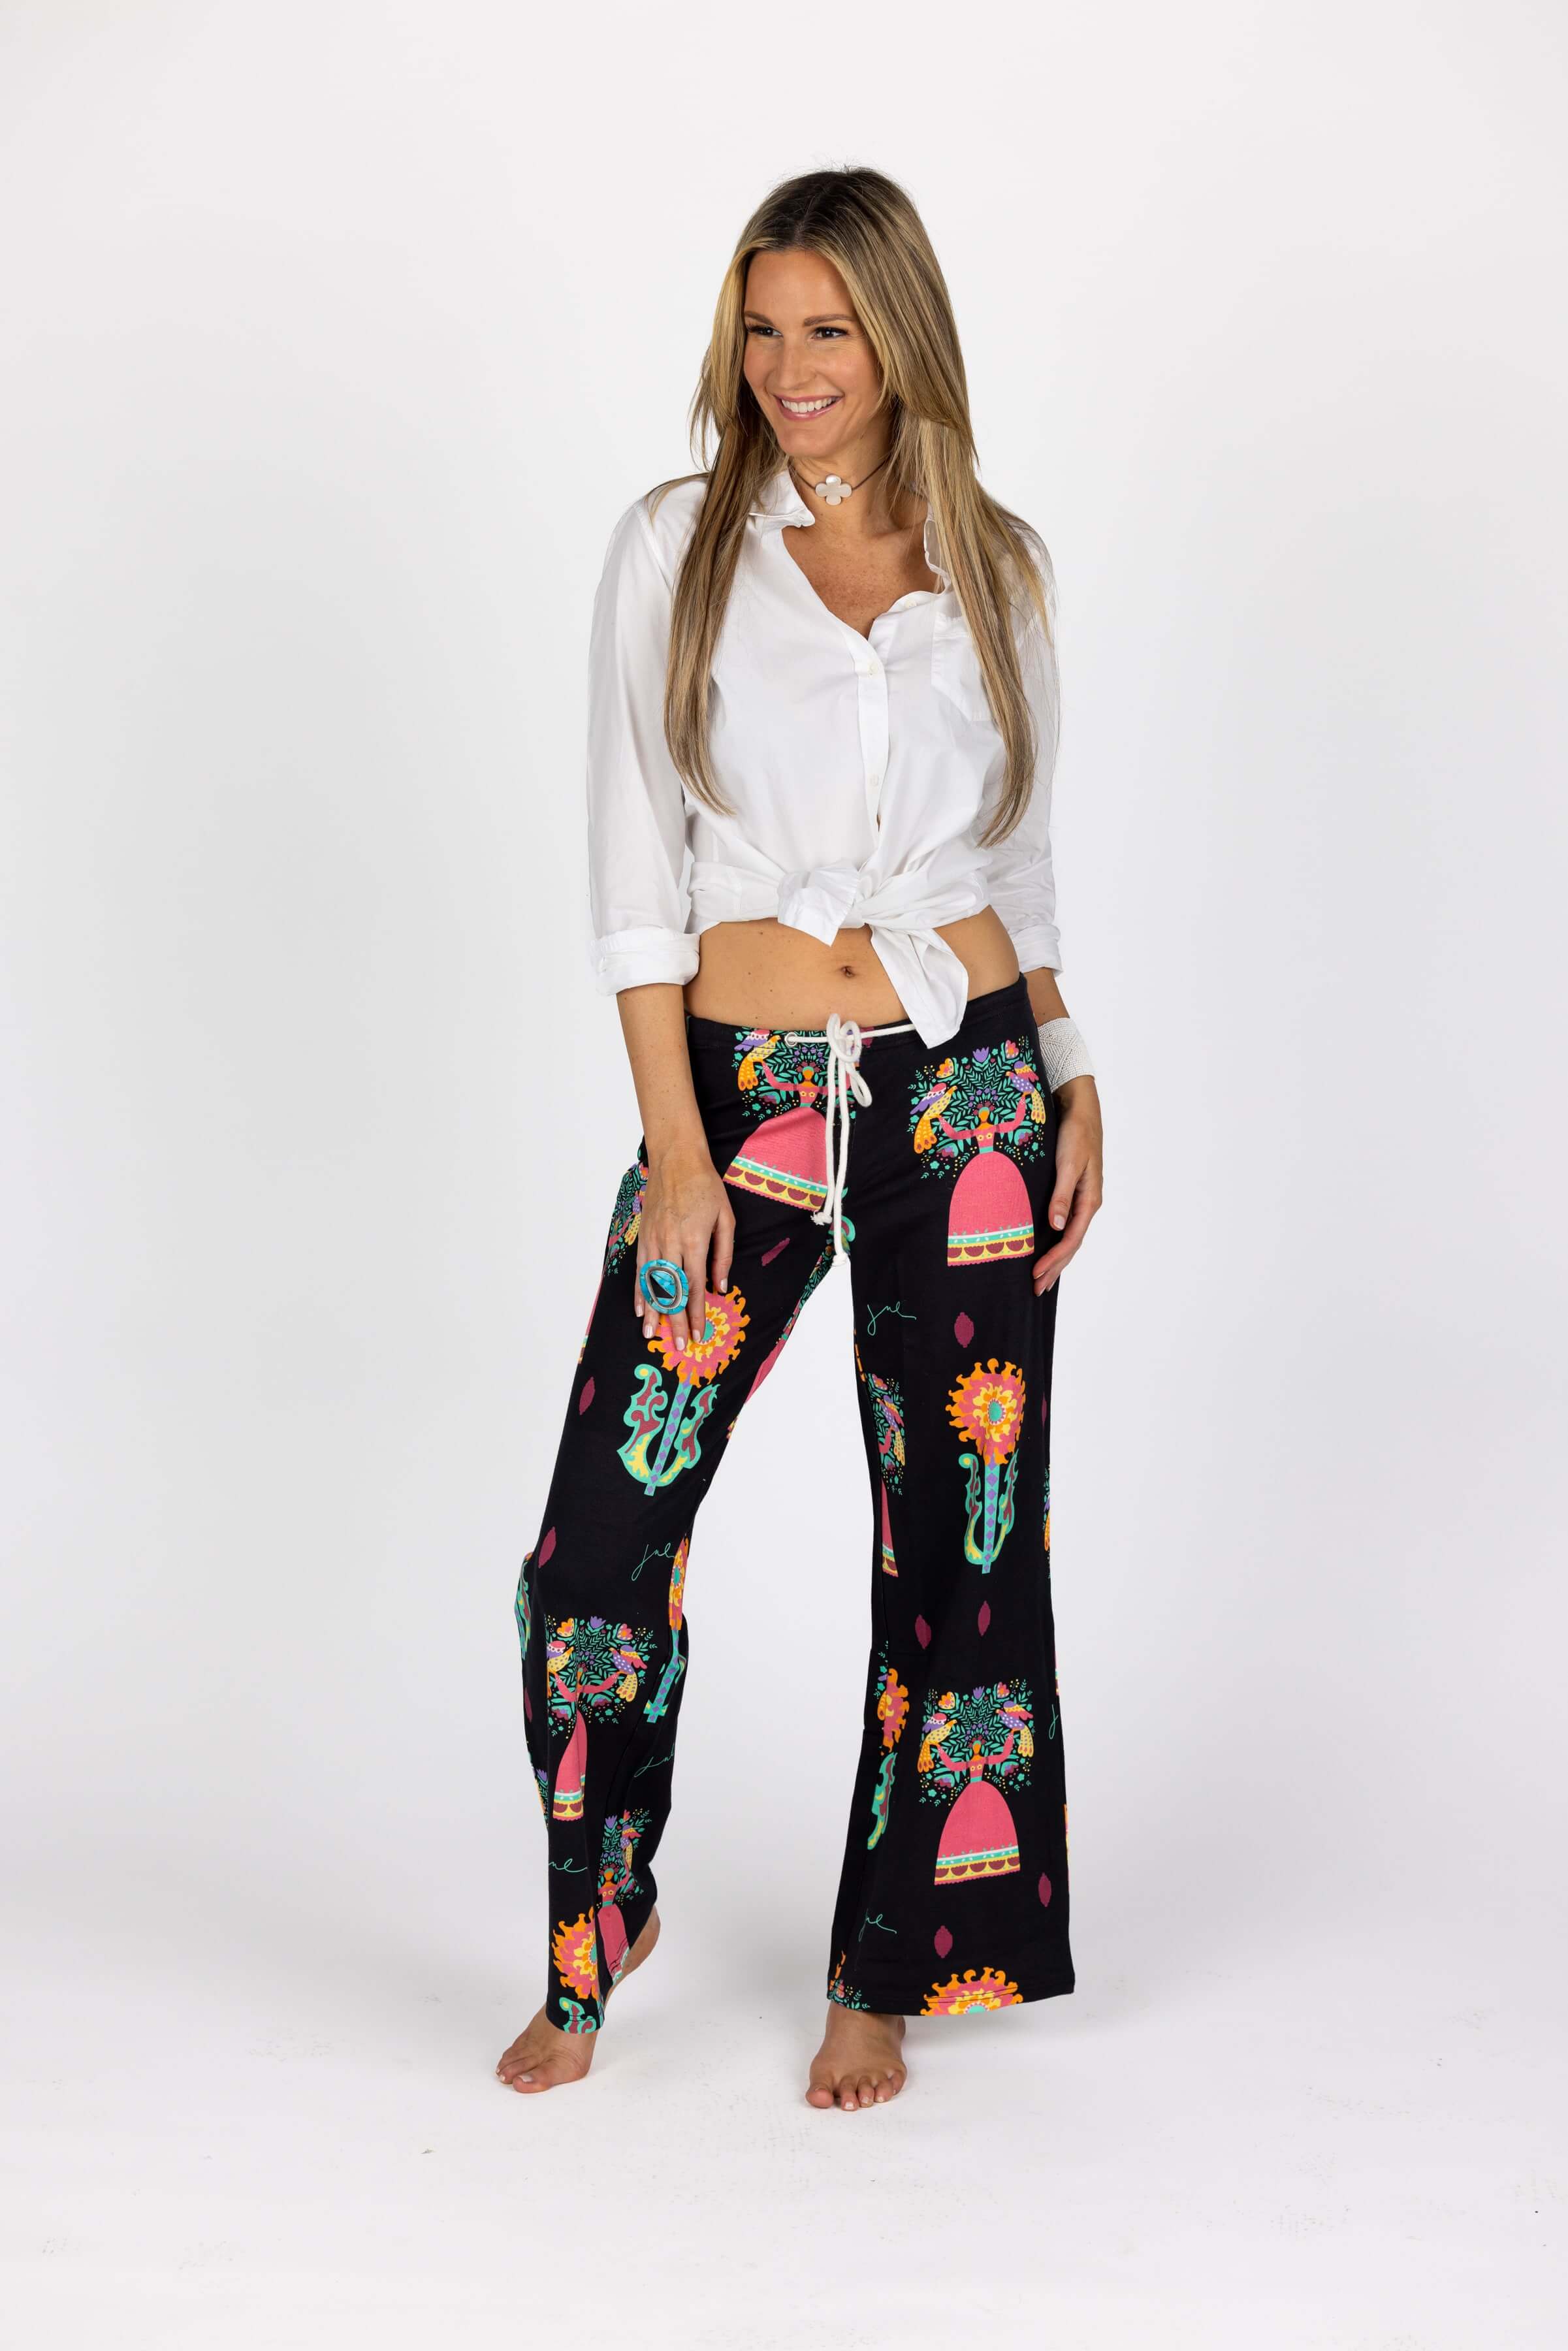 The terrycloth Sea Voyage pants in Spanish Lovers Black